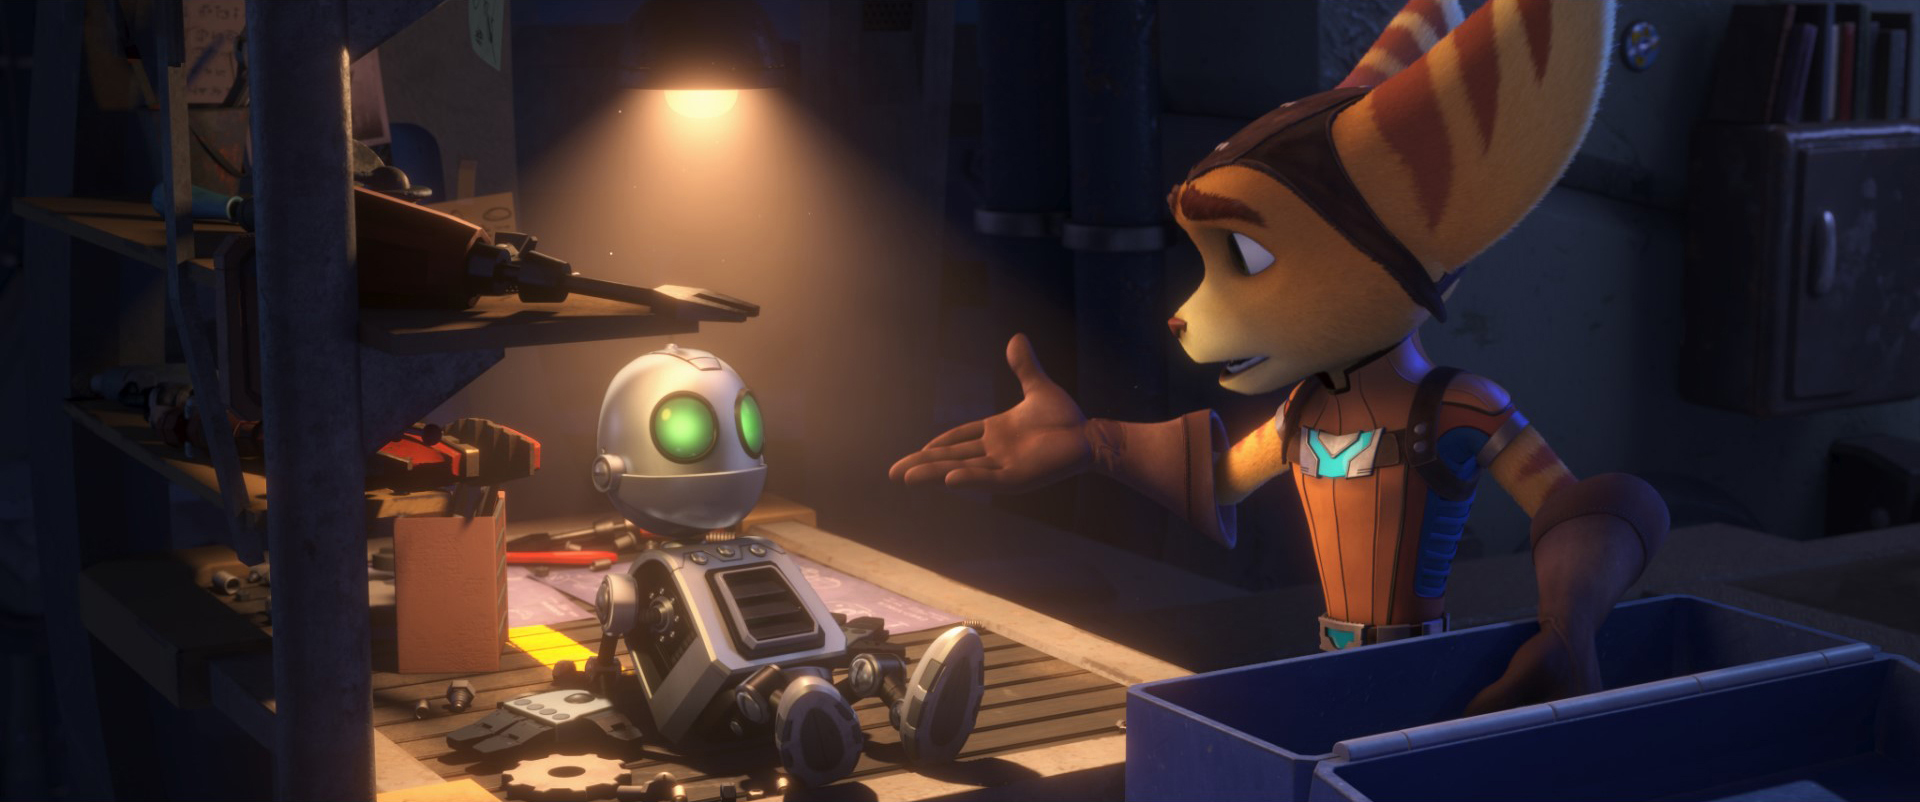 Ratchet-and-Clank.jpg